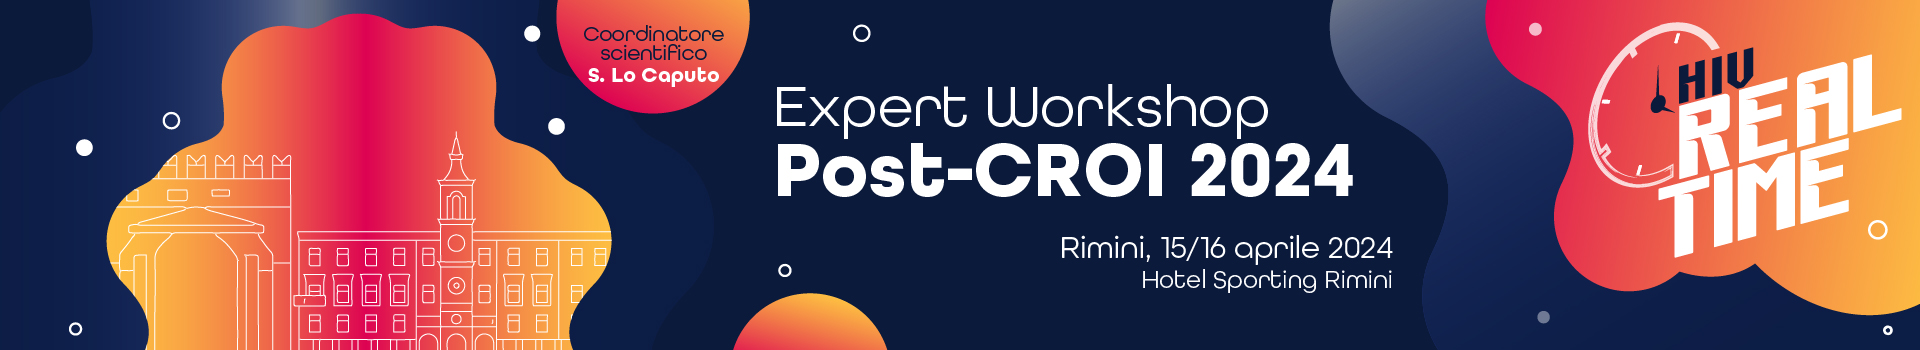 Expert Workshop - Real Time - Post CROI 2024